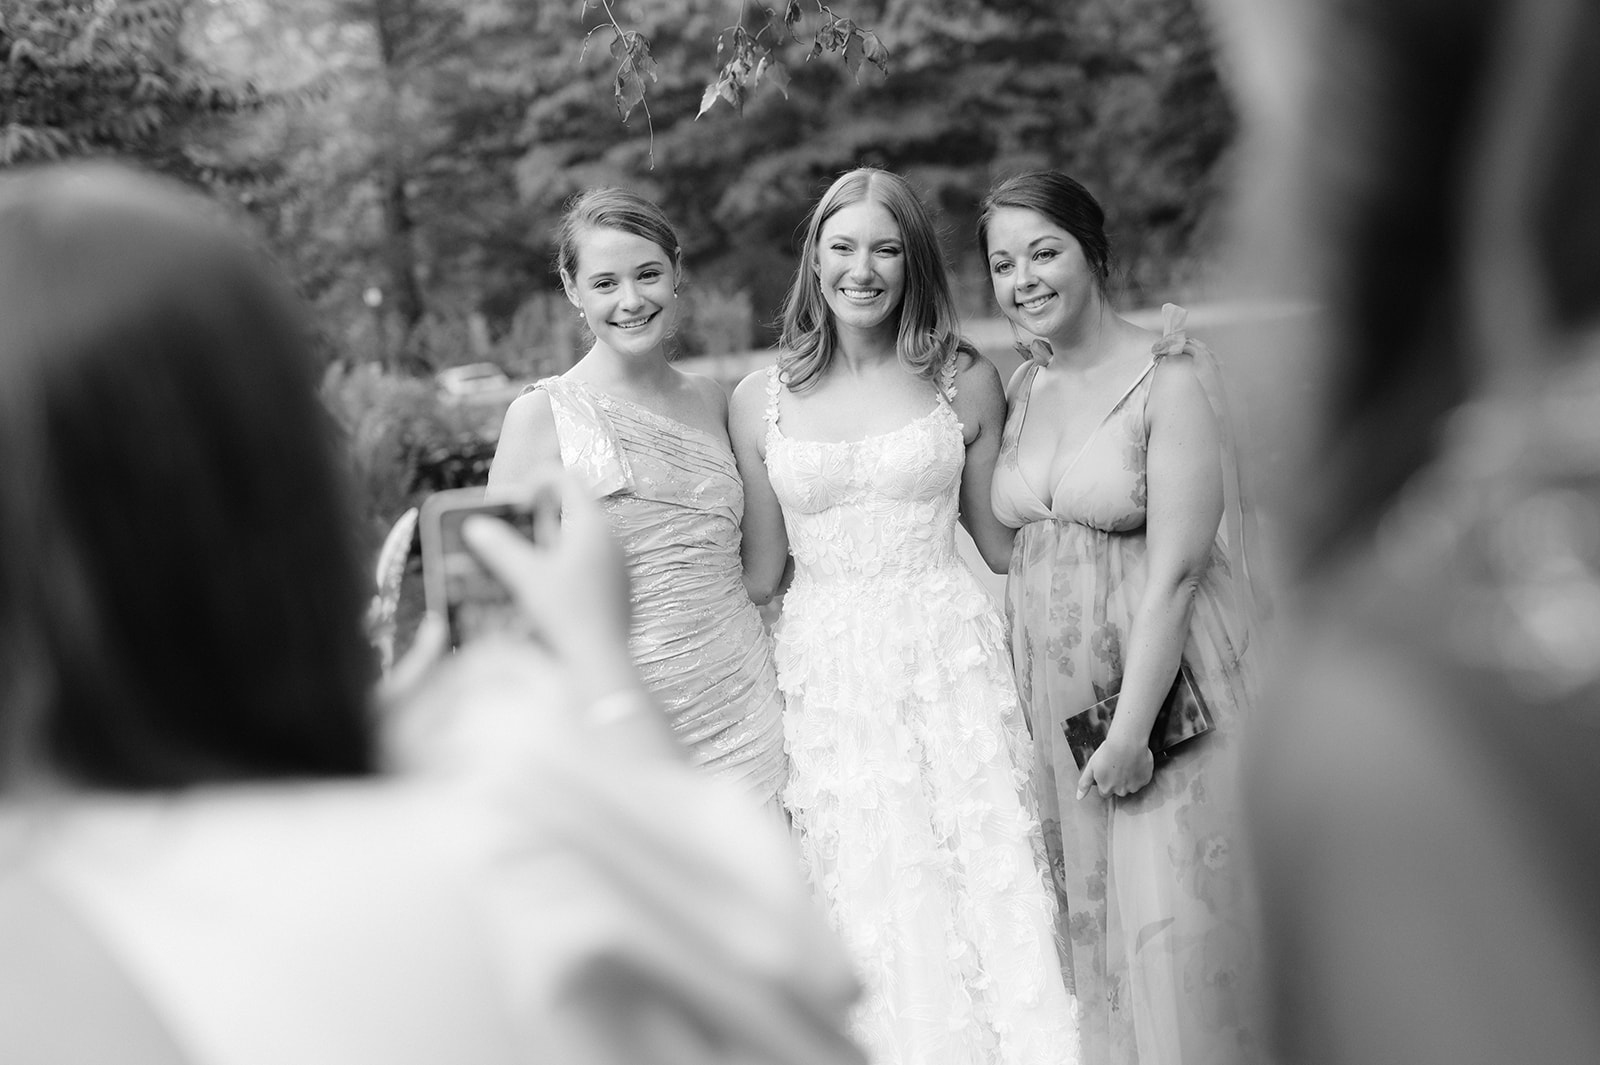 Bride and guests taking an Iphone photo.